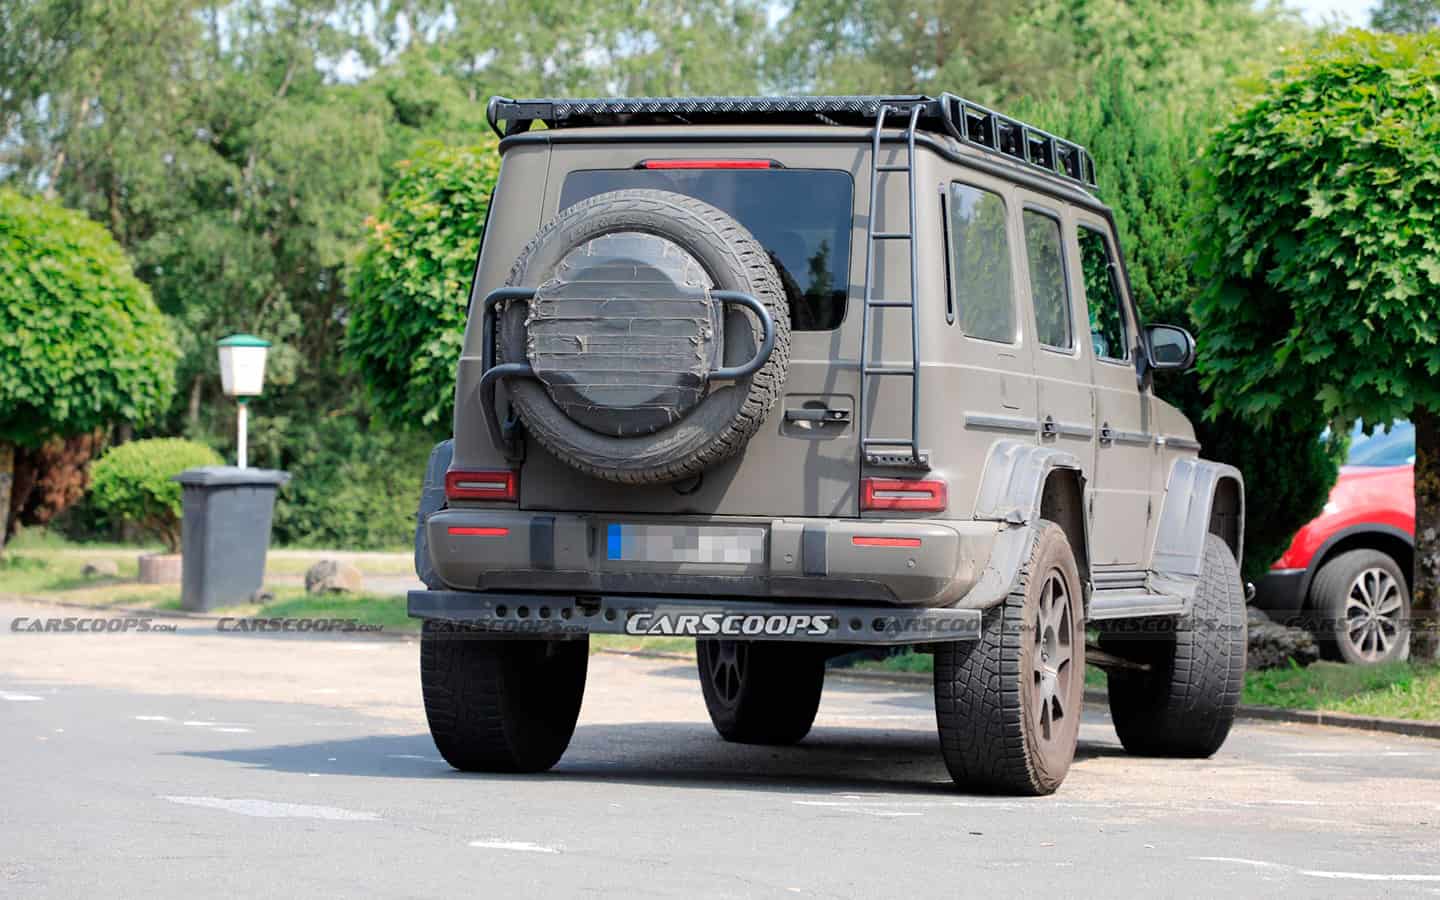 Mercedes brought to the test an extreme G-Class in a military style